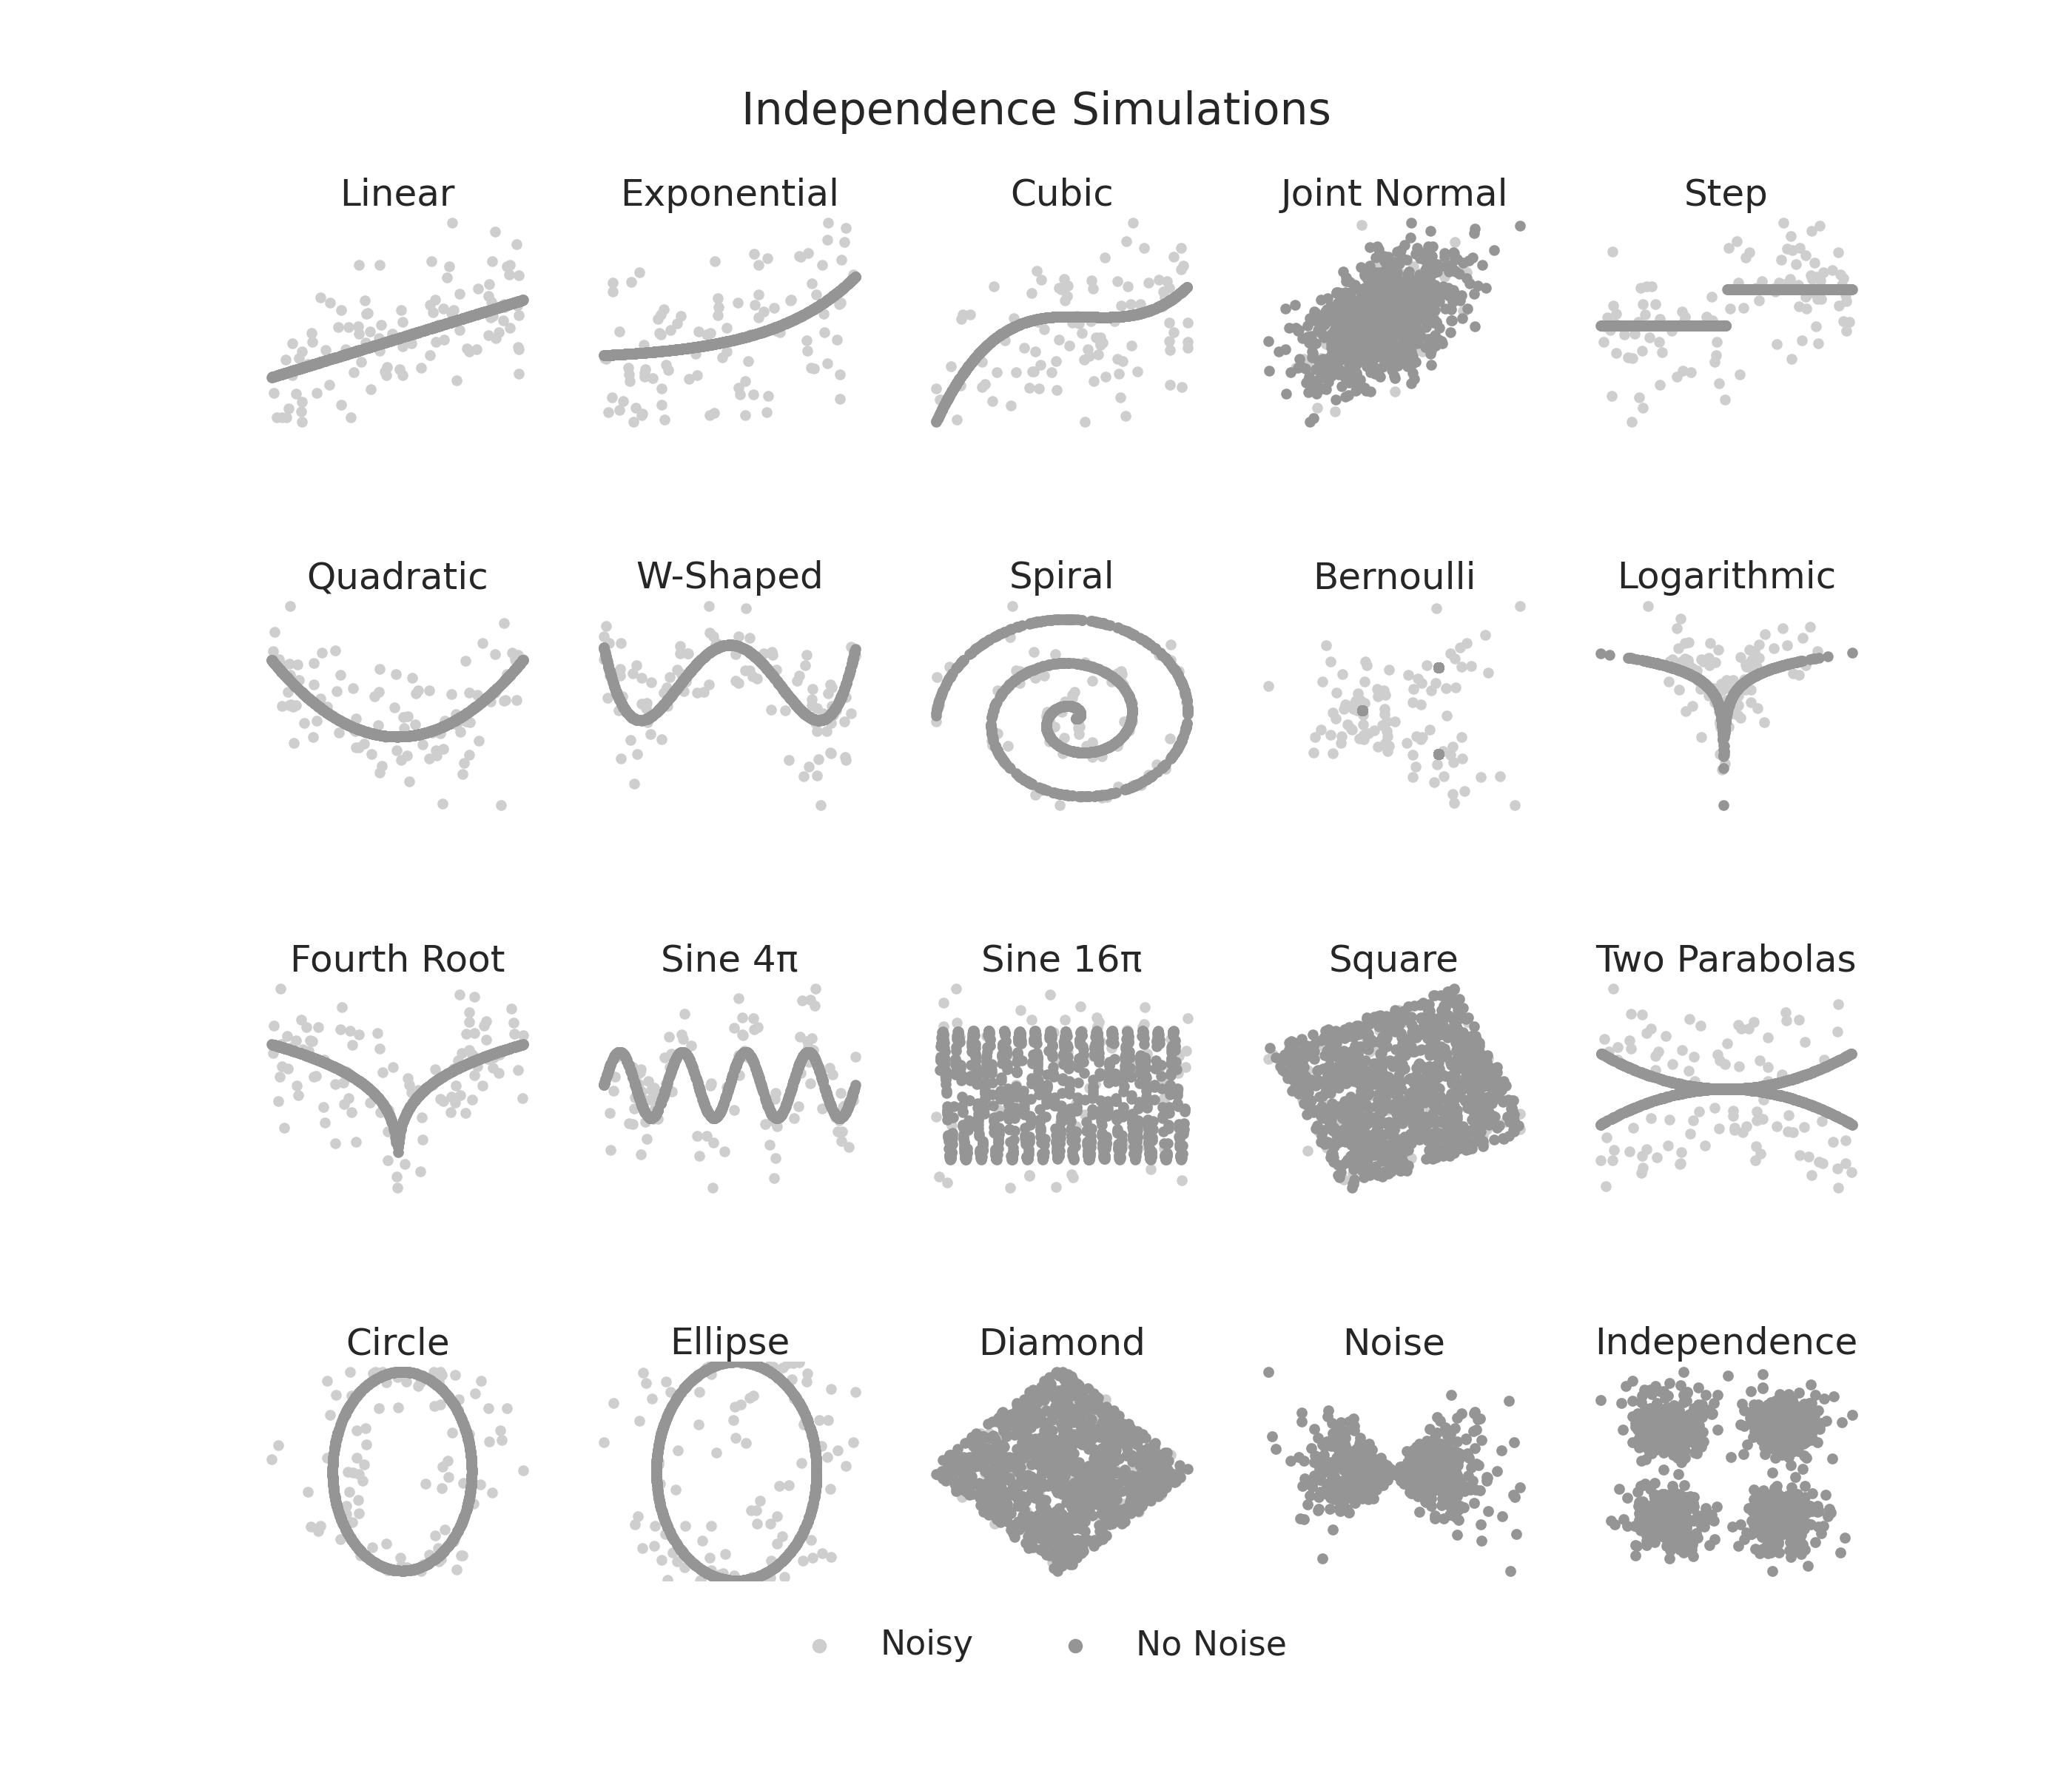 Independence Simulations, Linear, Exponential, Cubic, Joint Normal, Step, Quadratic, W-Shaped, Spiral, Bernoulli, Logarithmic, Fourth Root, Sine 4π, Sine 16π, Square, Two Parabolas, Circle, Ellipse, Diamond, Noise, Independence